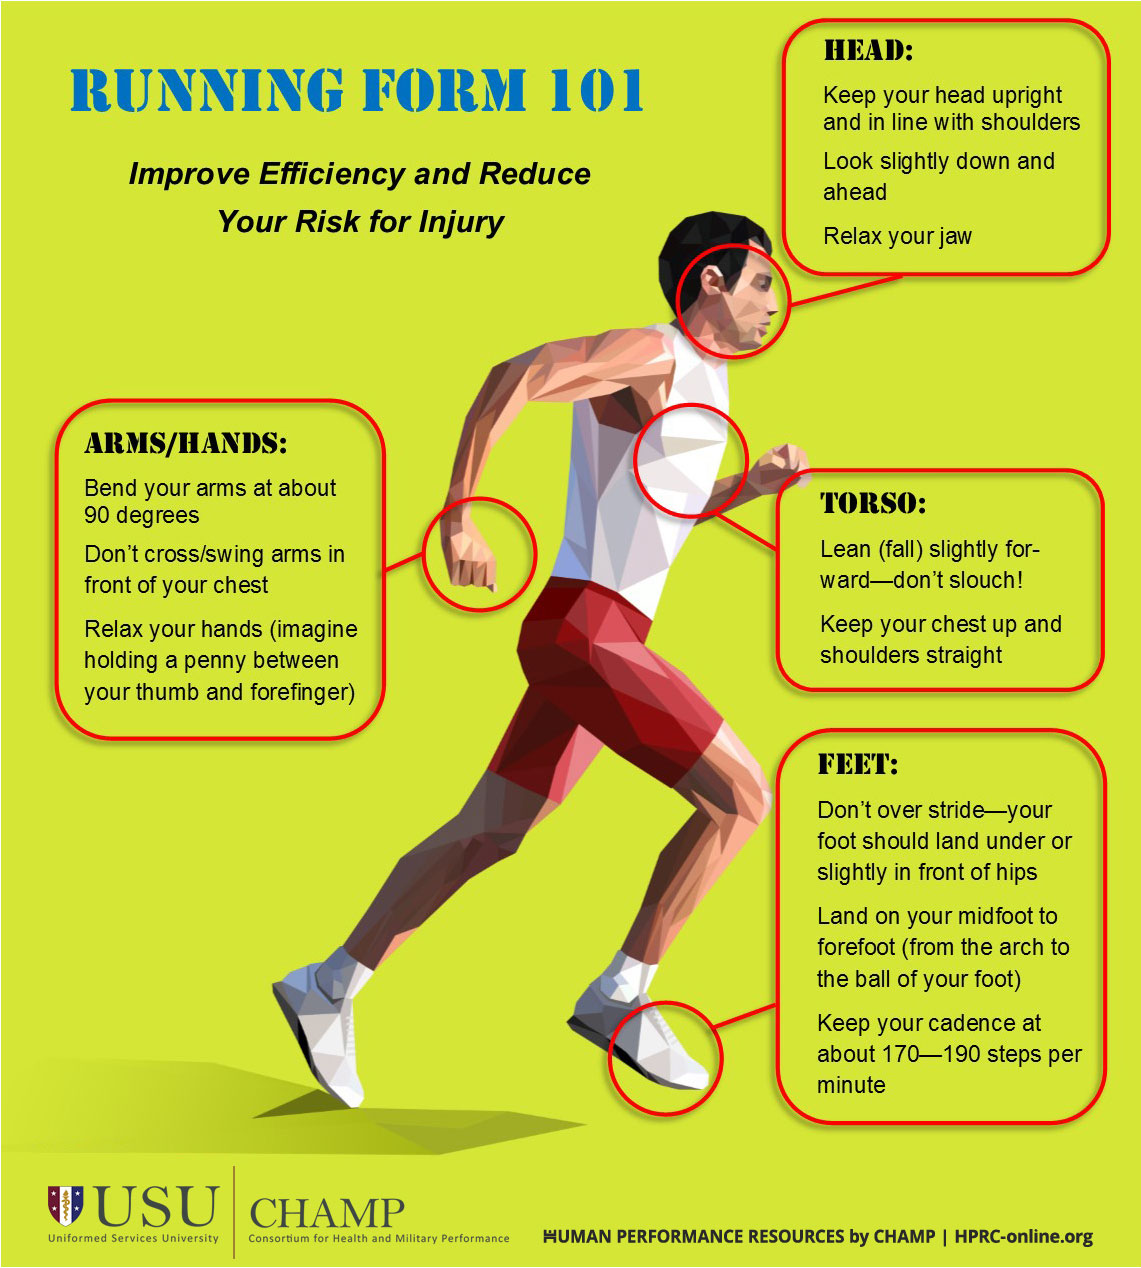 III. Common Mistakes in Running Form